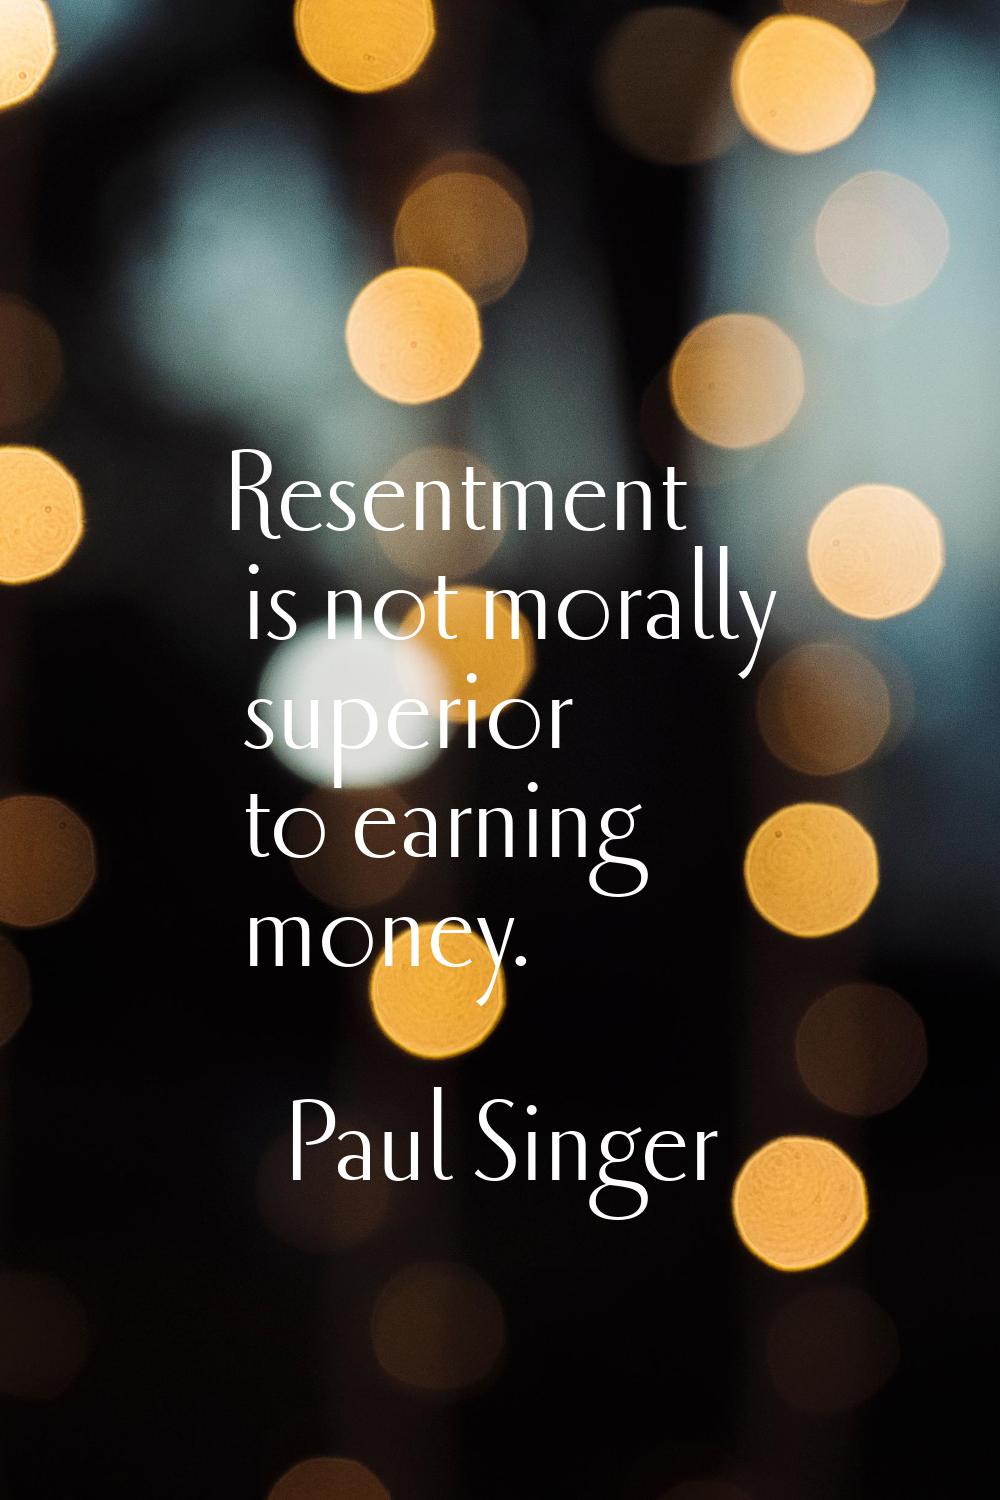 Resentment is not morally superior to earning money.